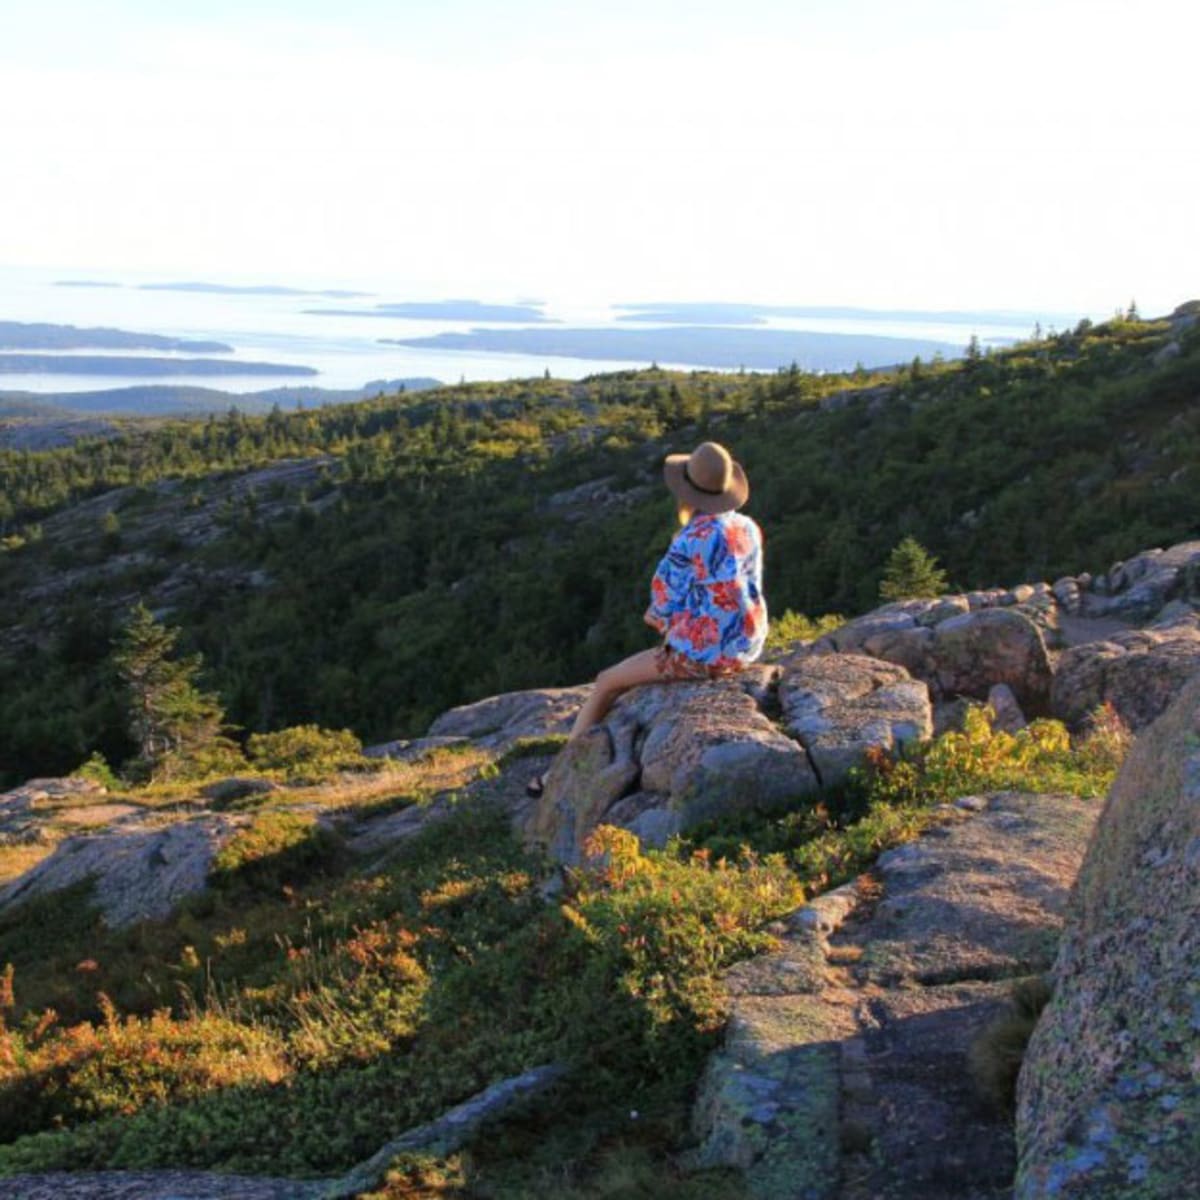 Stylish Hiking Outfit for Acadia National Park & Bar Harbor, Maine - Styled  by Science